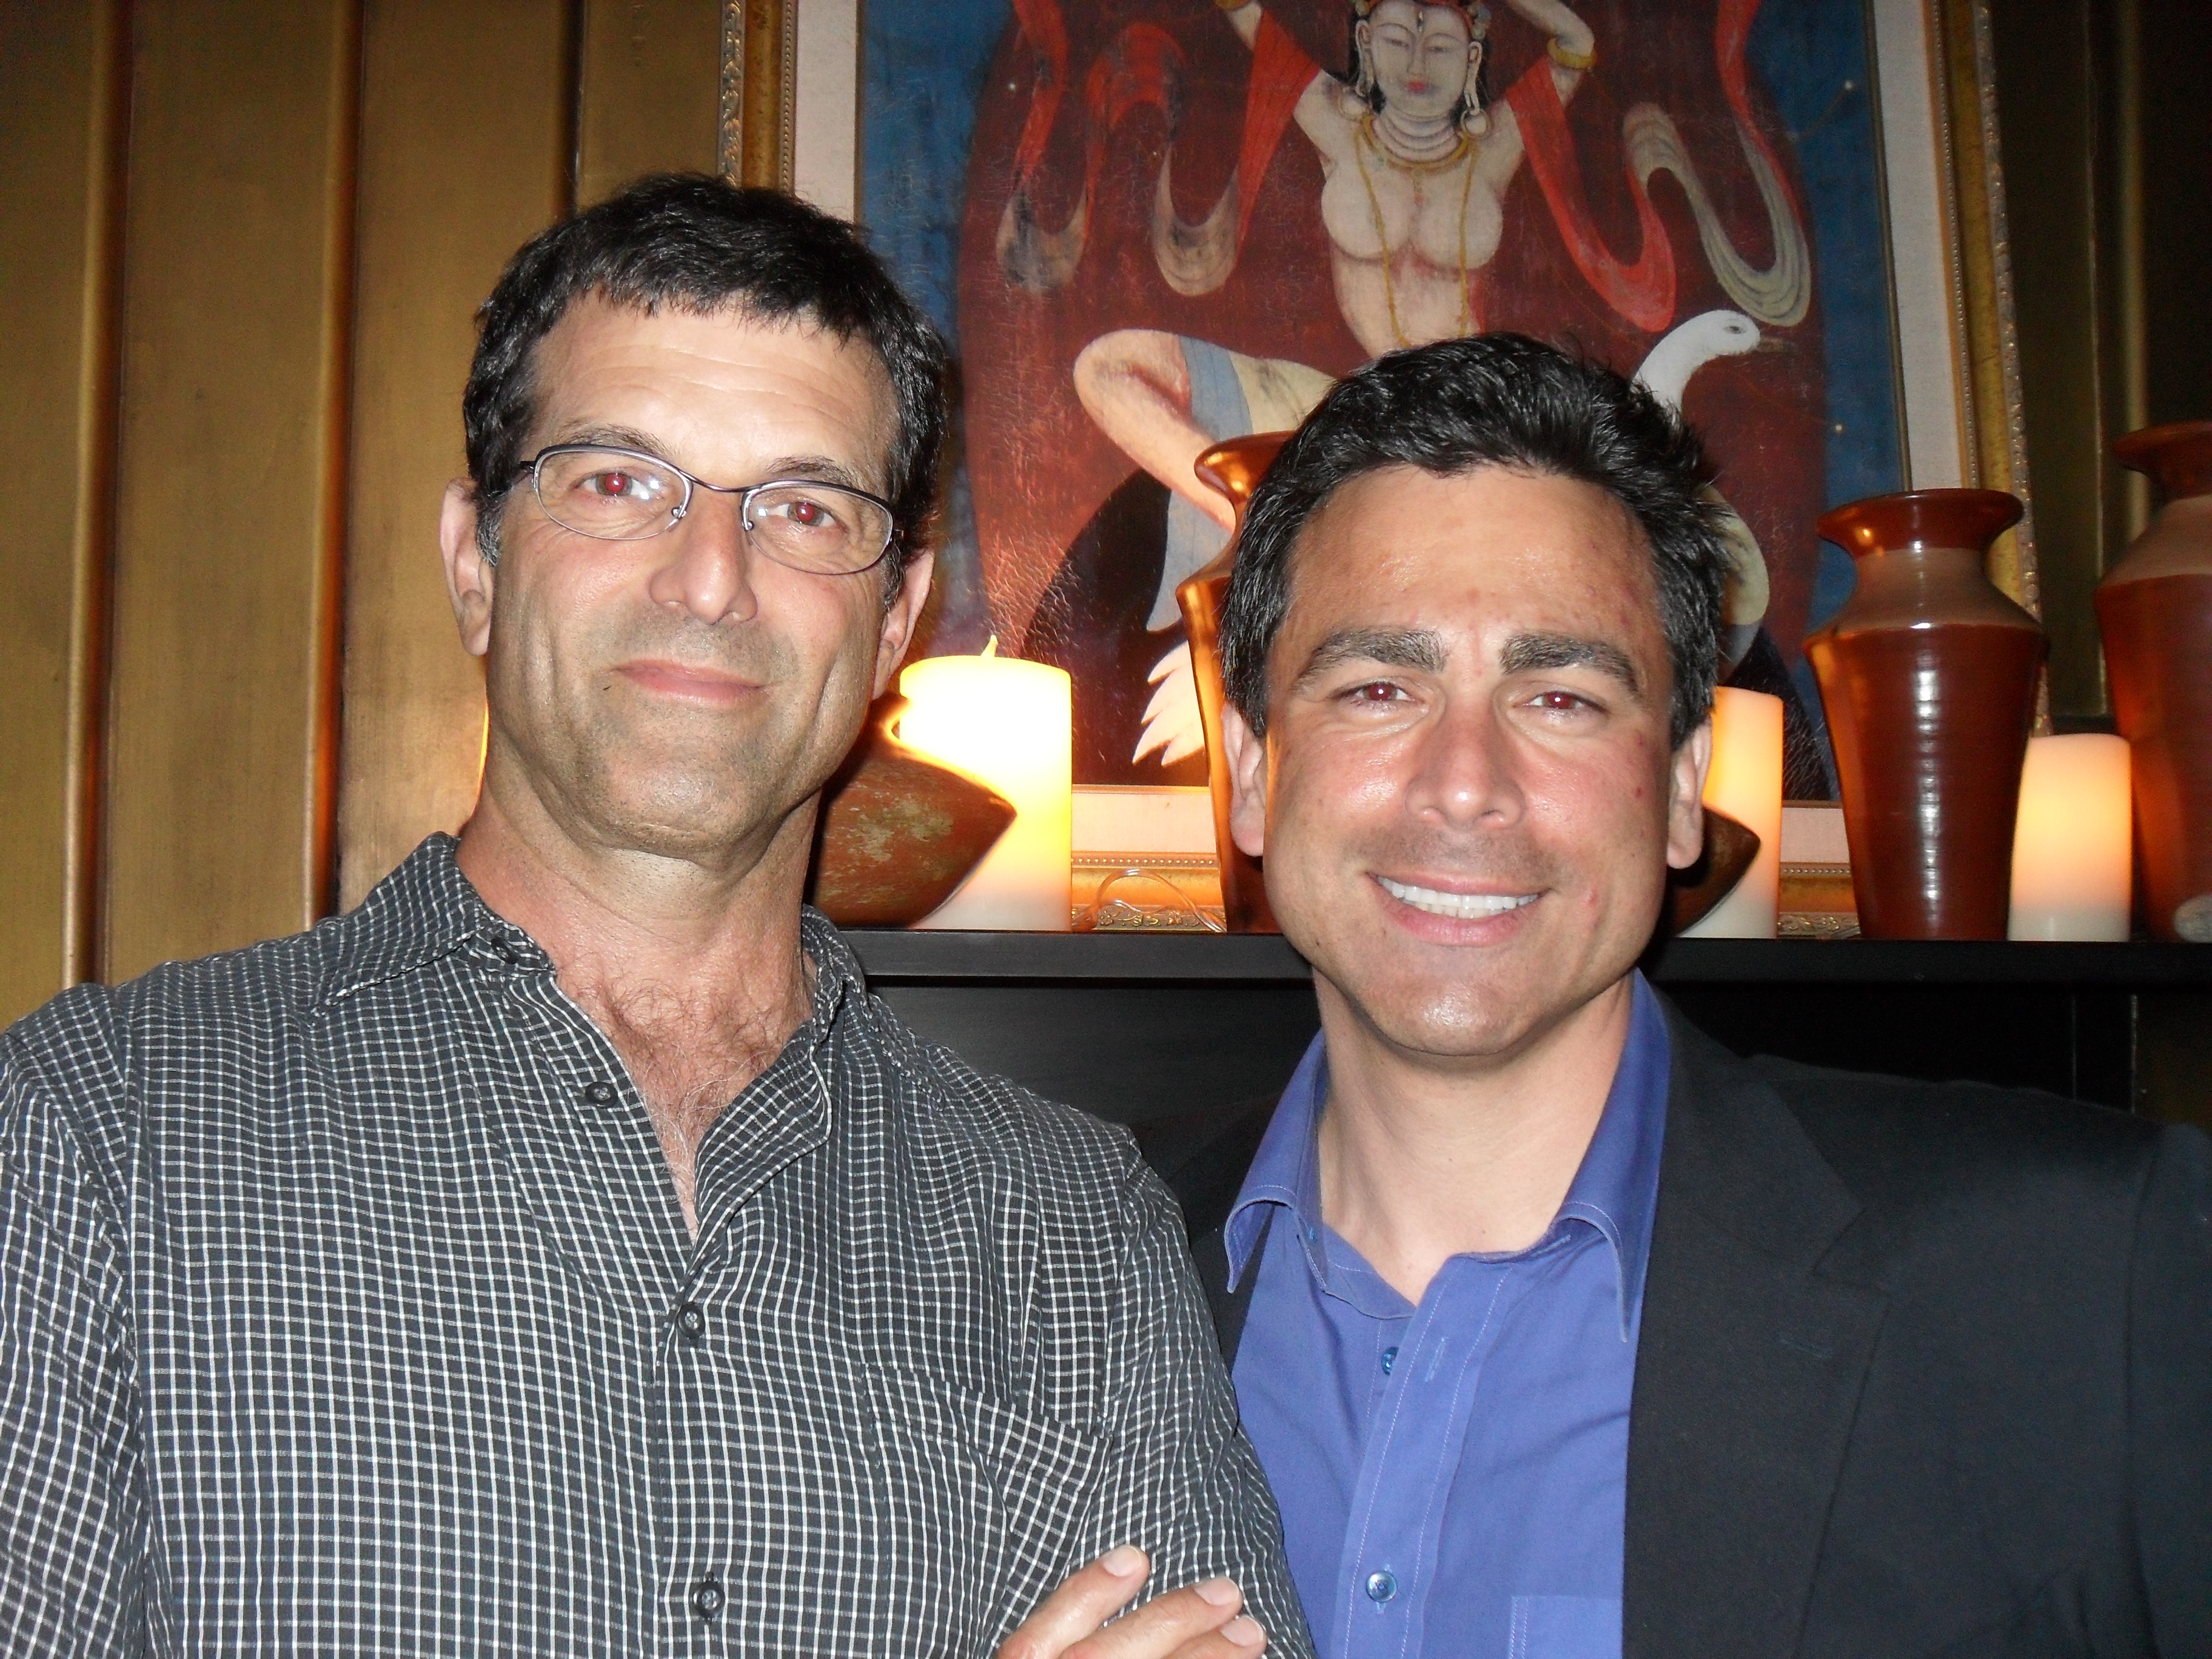 Mark Harelick and John Prudhont at the Meeting Spencer Wrap Party in Beverly Hills